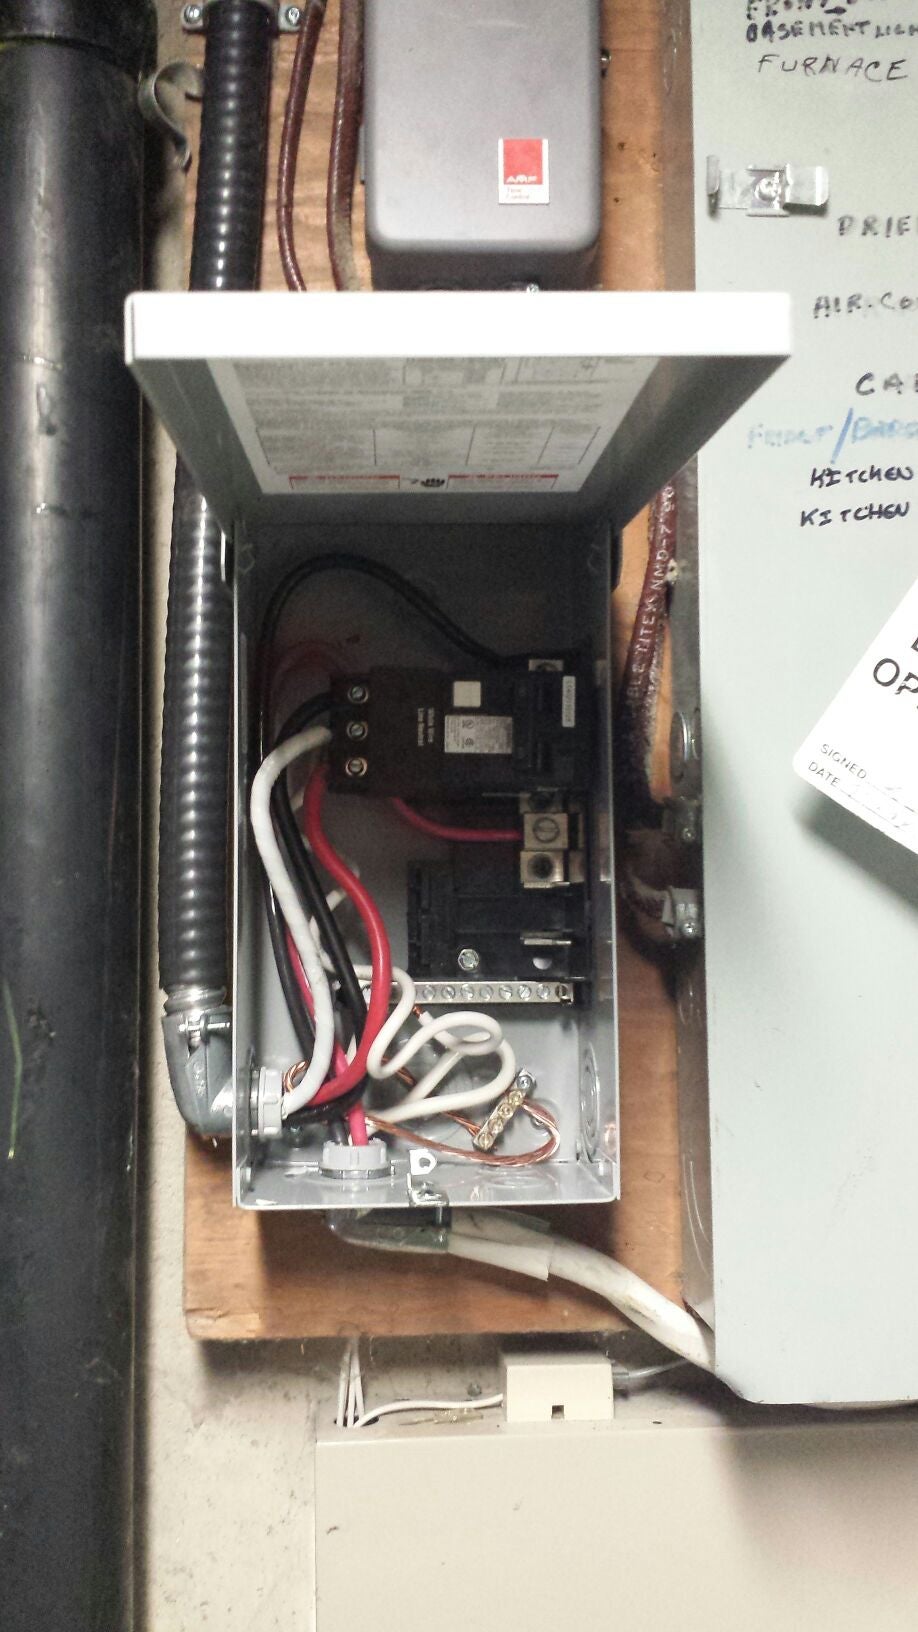 CEC - New hot tub disconnect rule | Page 3 | Electrician Talk